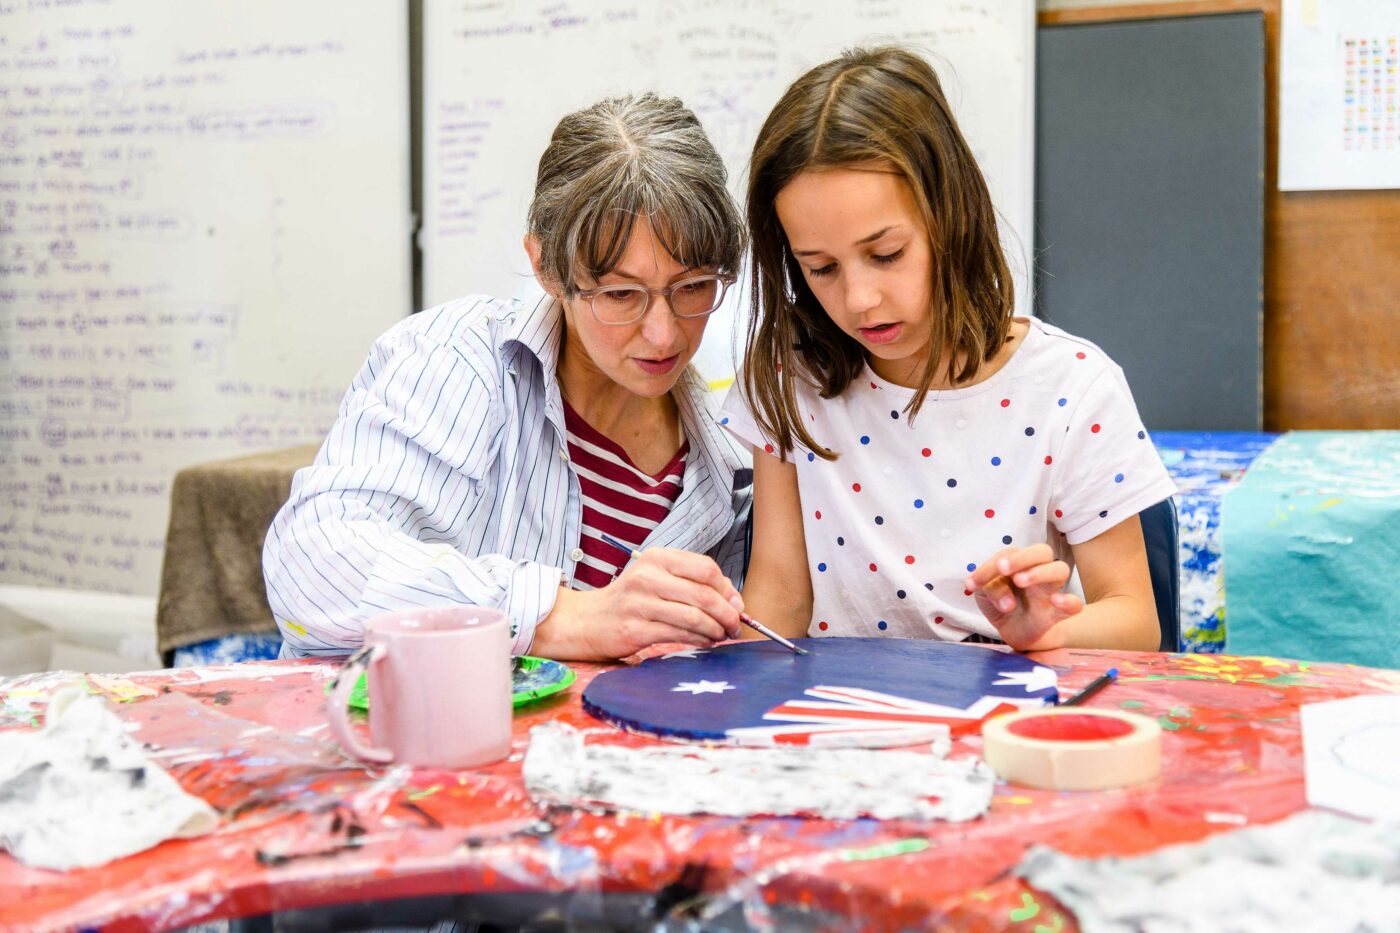 Teacher Aide works on painting with a child.